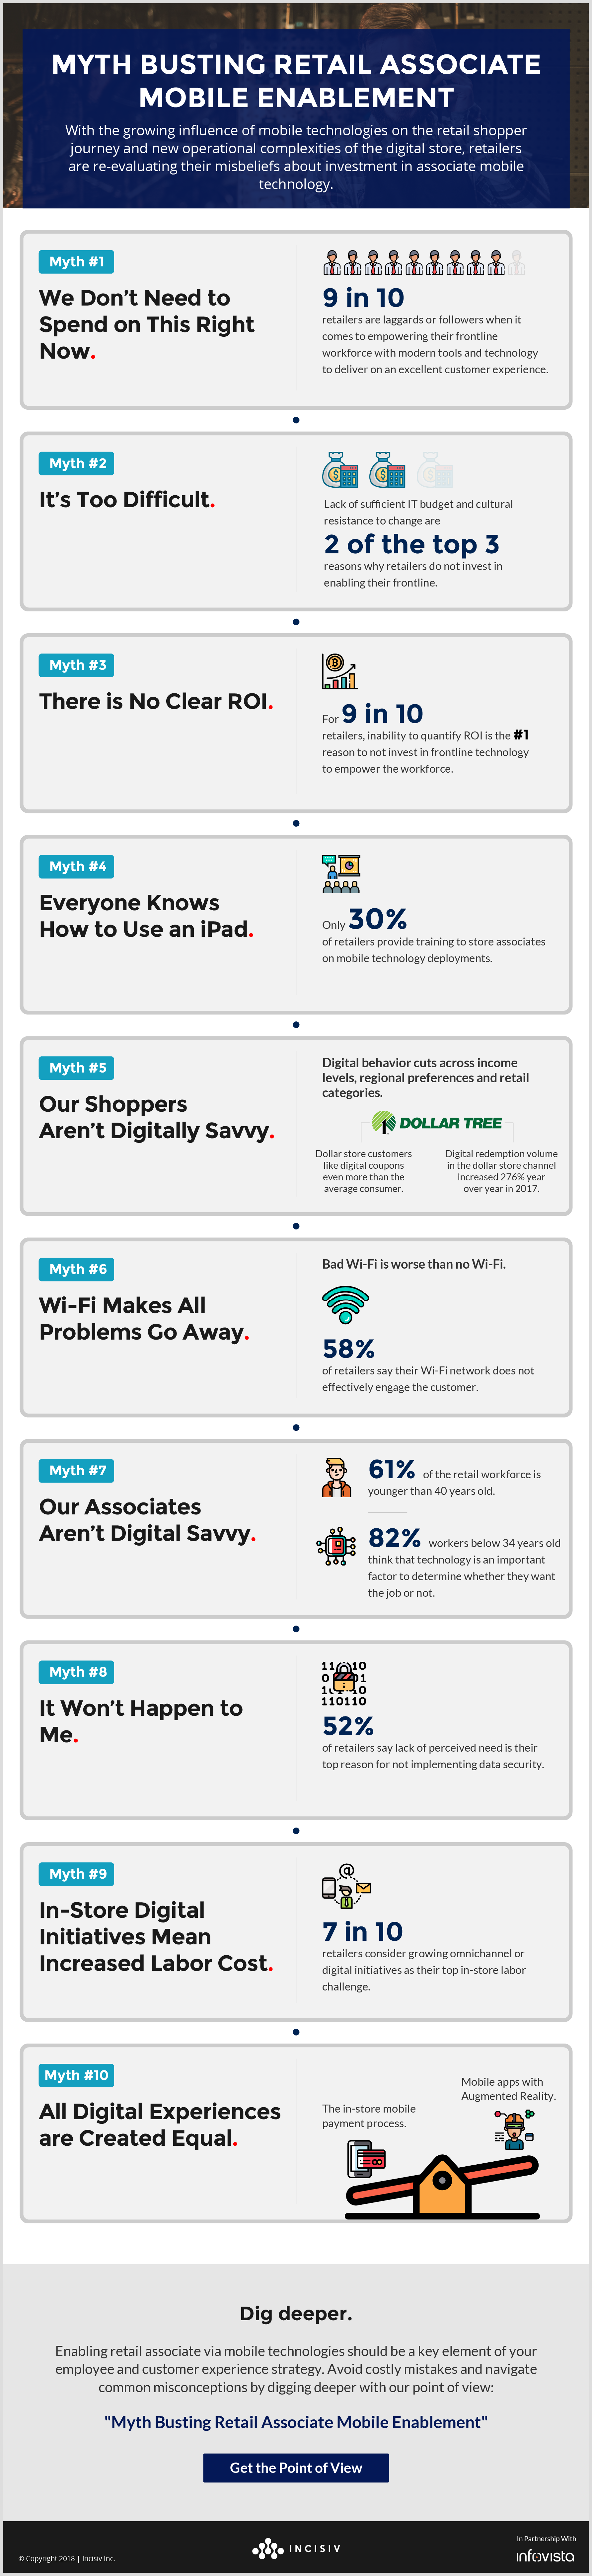 MYTH BUSTING RETAIL ASSOCIATE MOBILE ENABLEMENT, Infographic